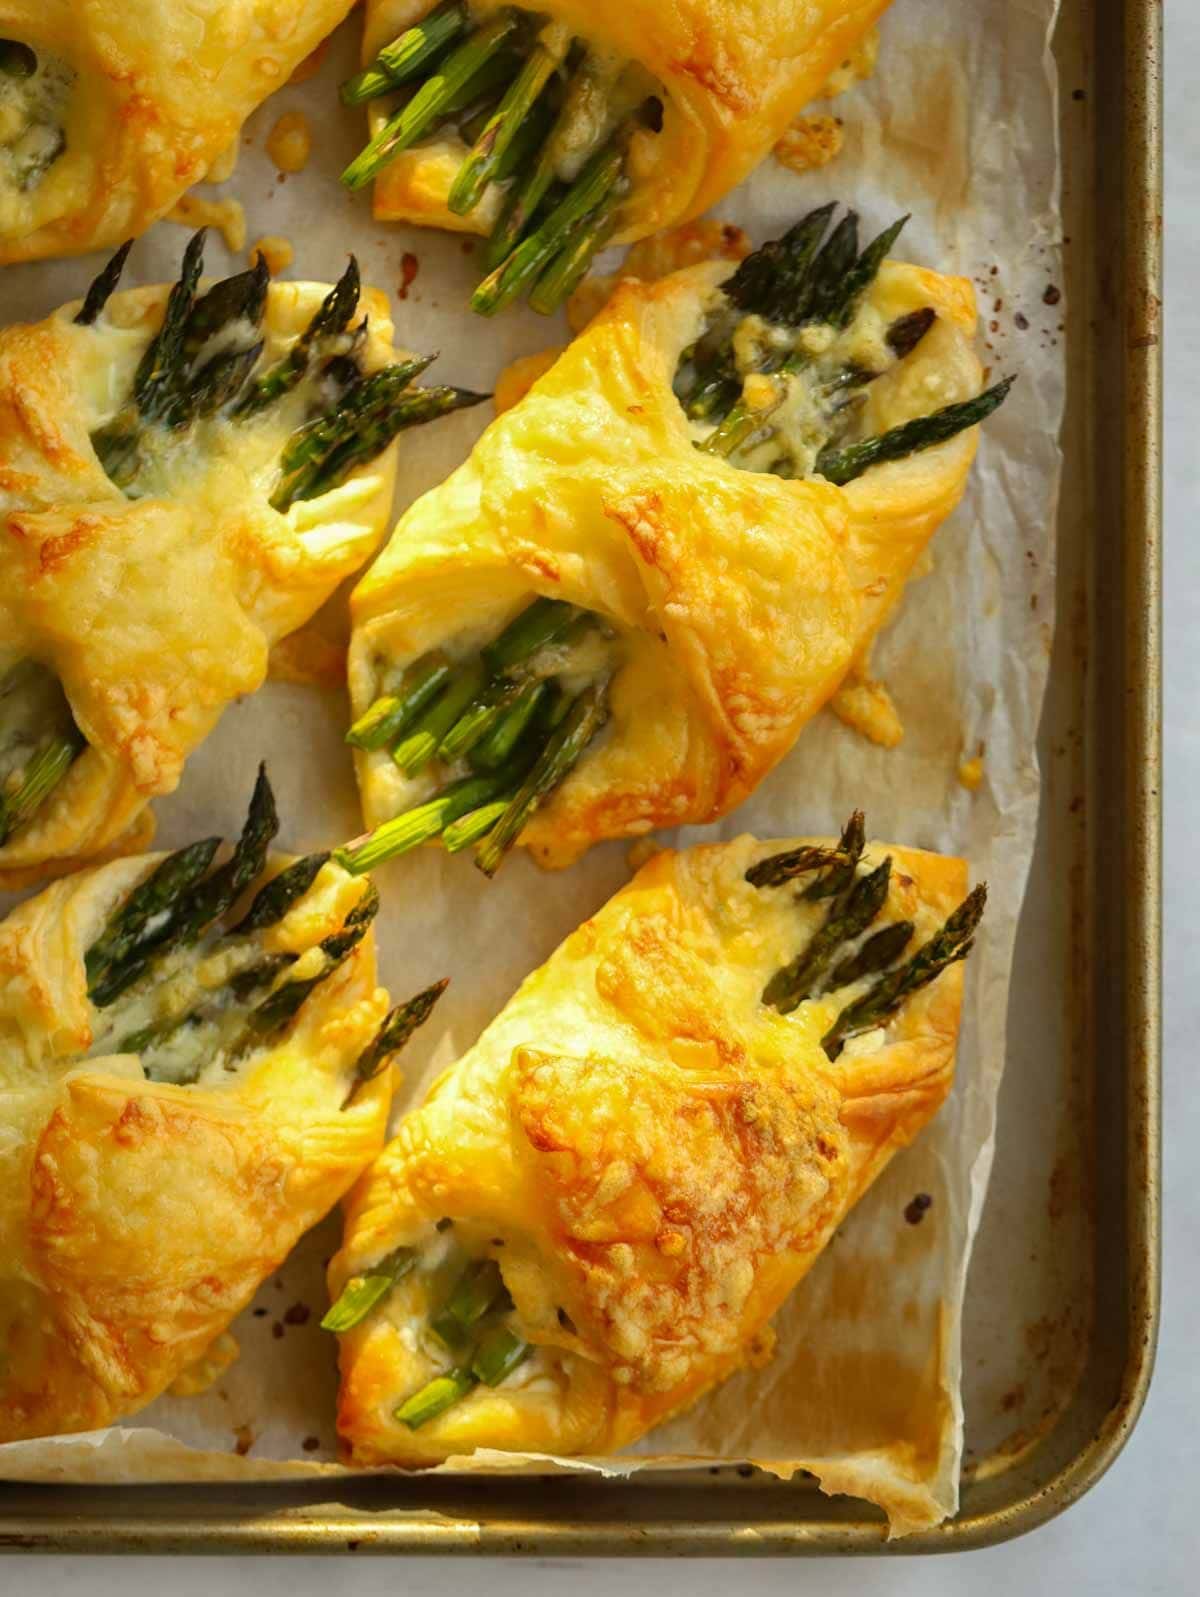 Puff pastry parcels wrapped with asparagus and cheese filling.